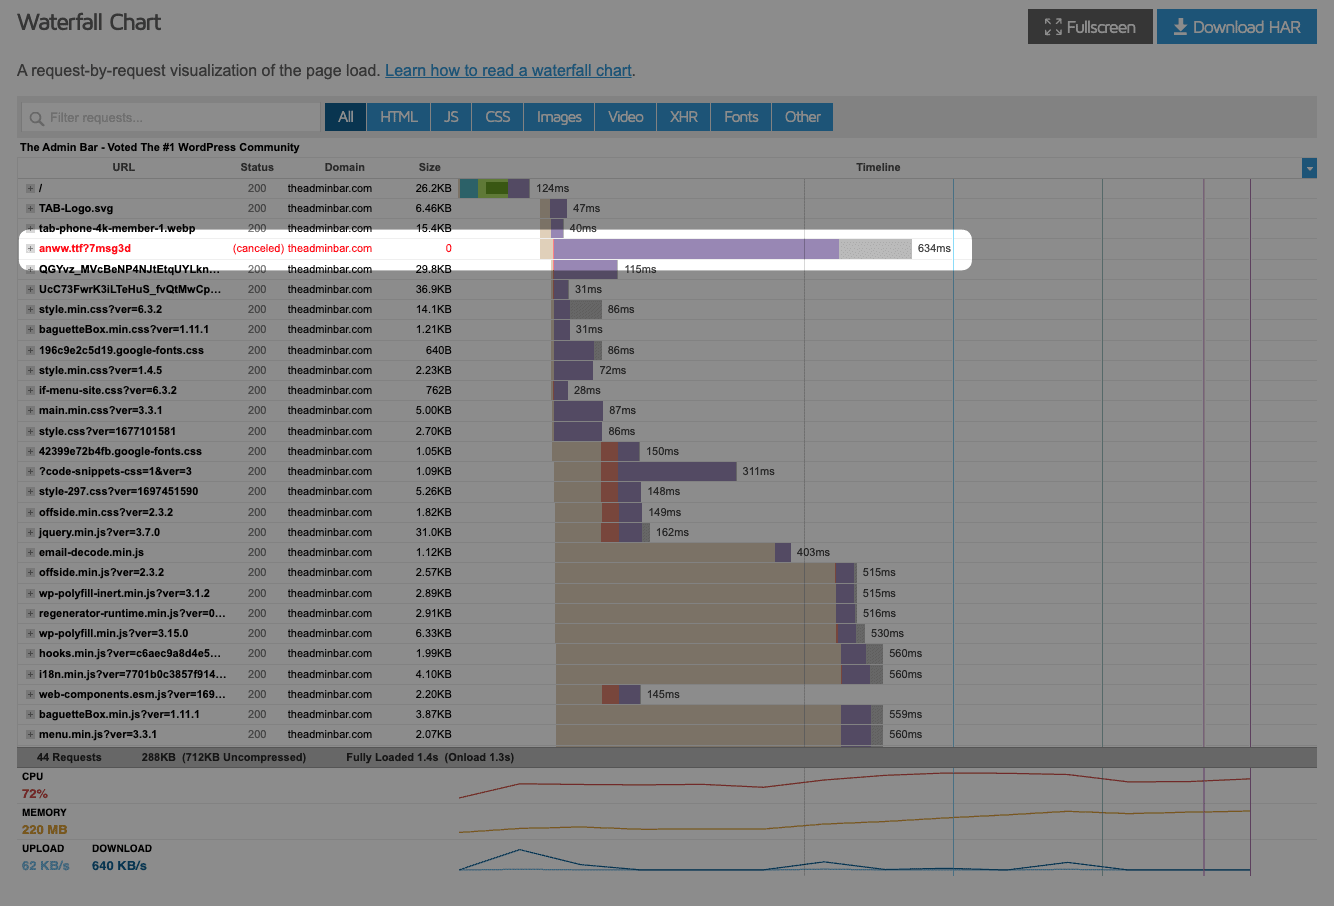 A screenshot of a missing asset in the waterfall chart.